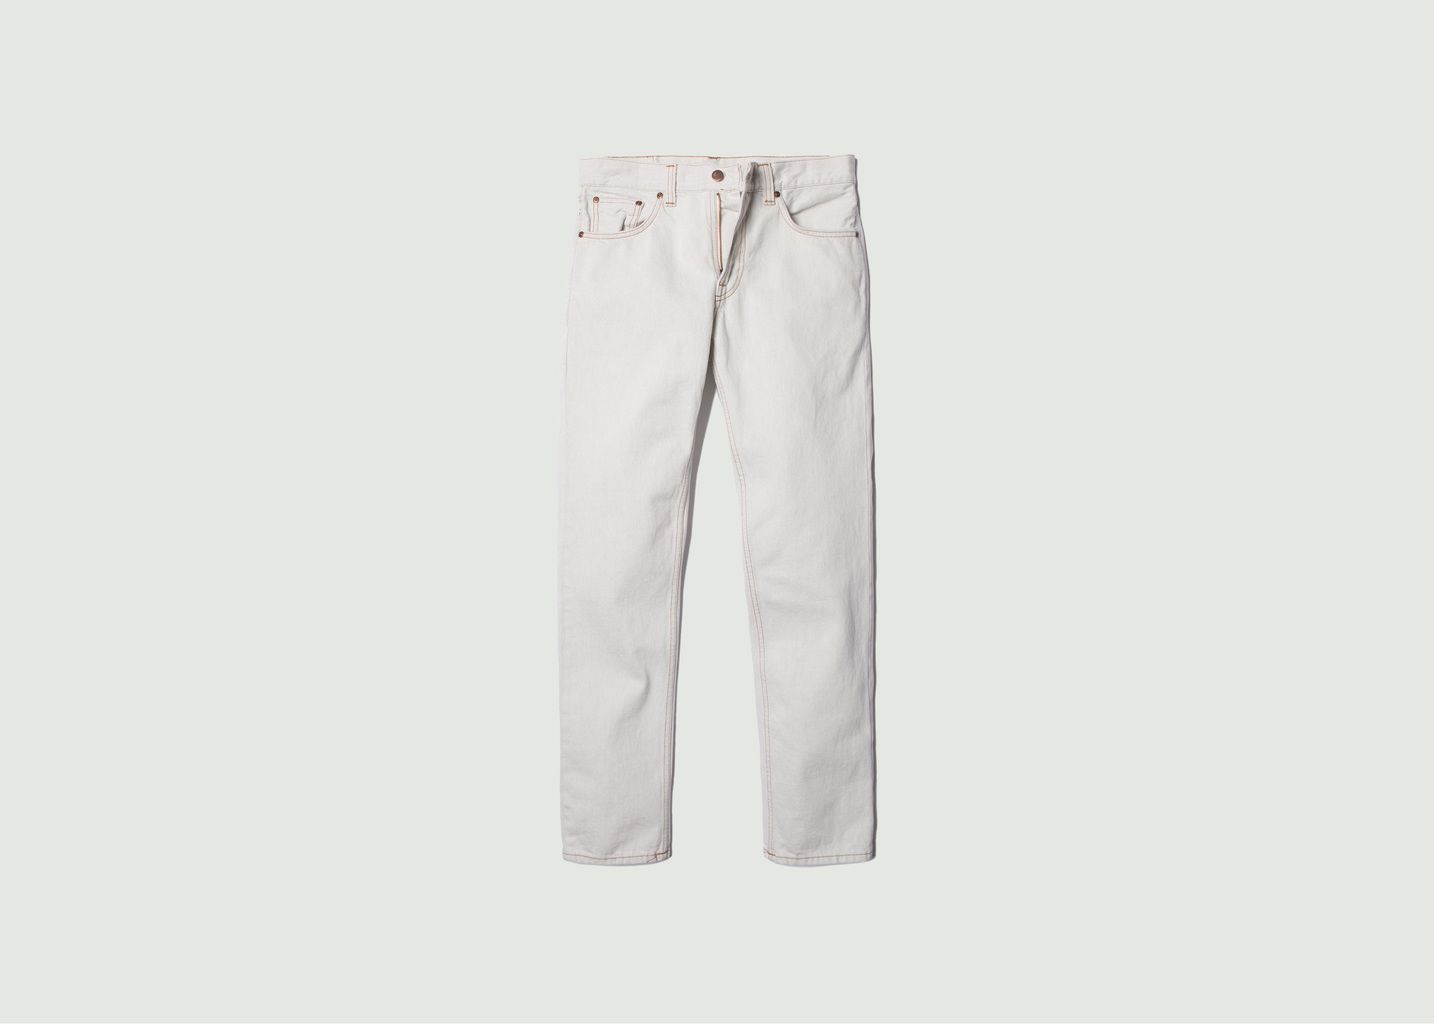 Gritty Jackson Jeans - Nudie Jeans